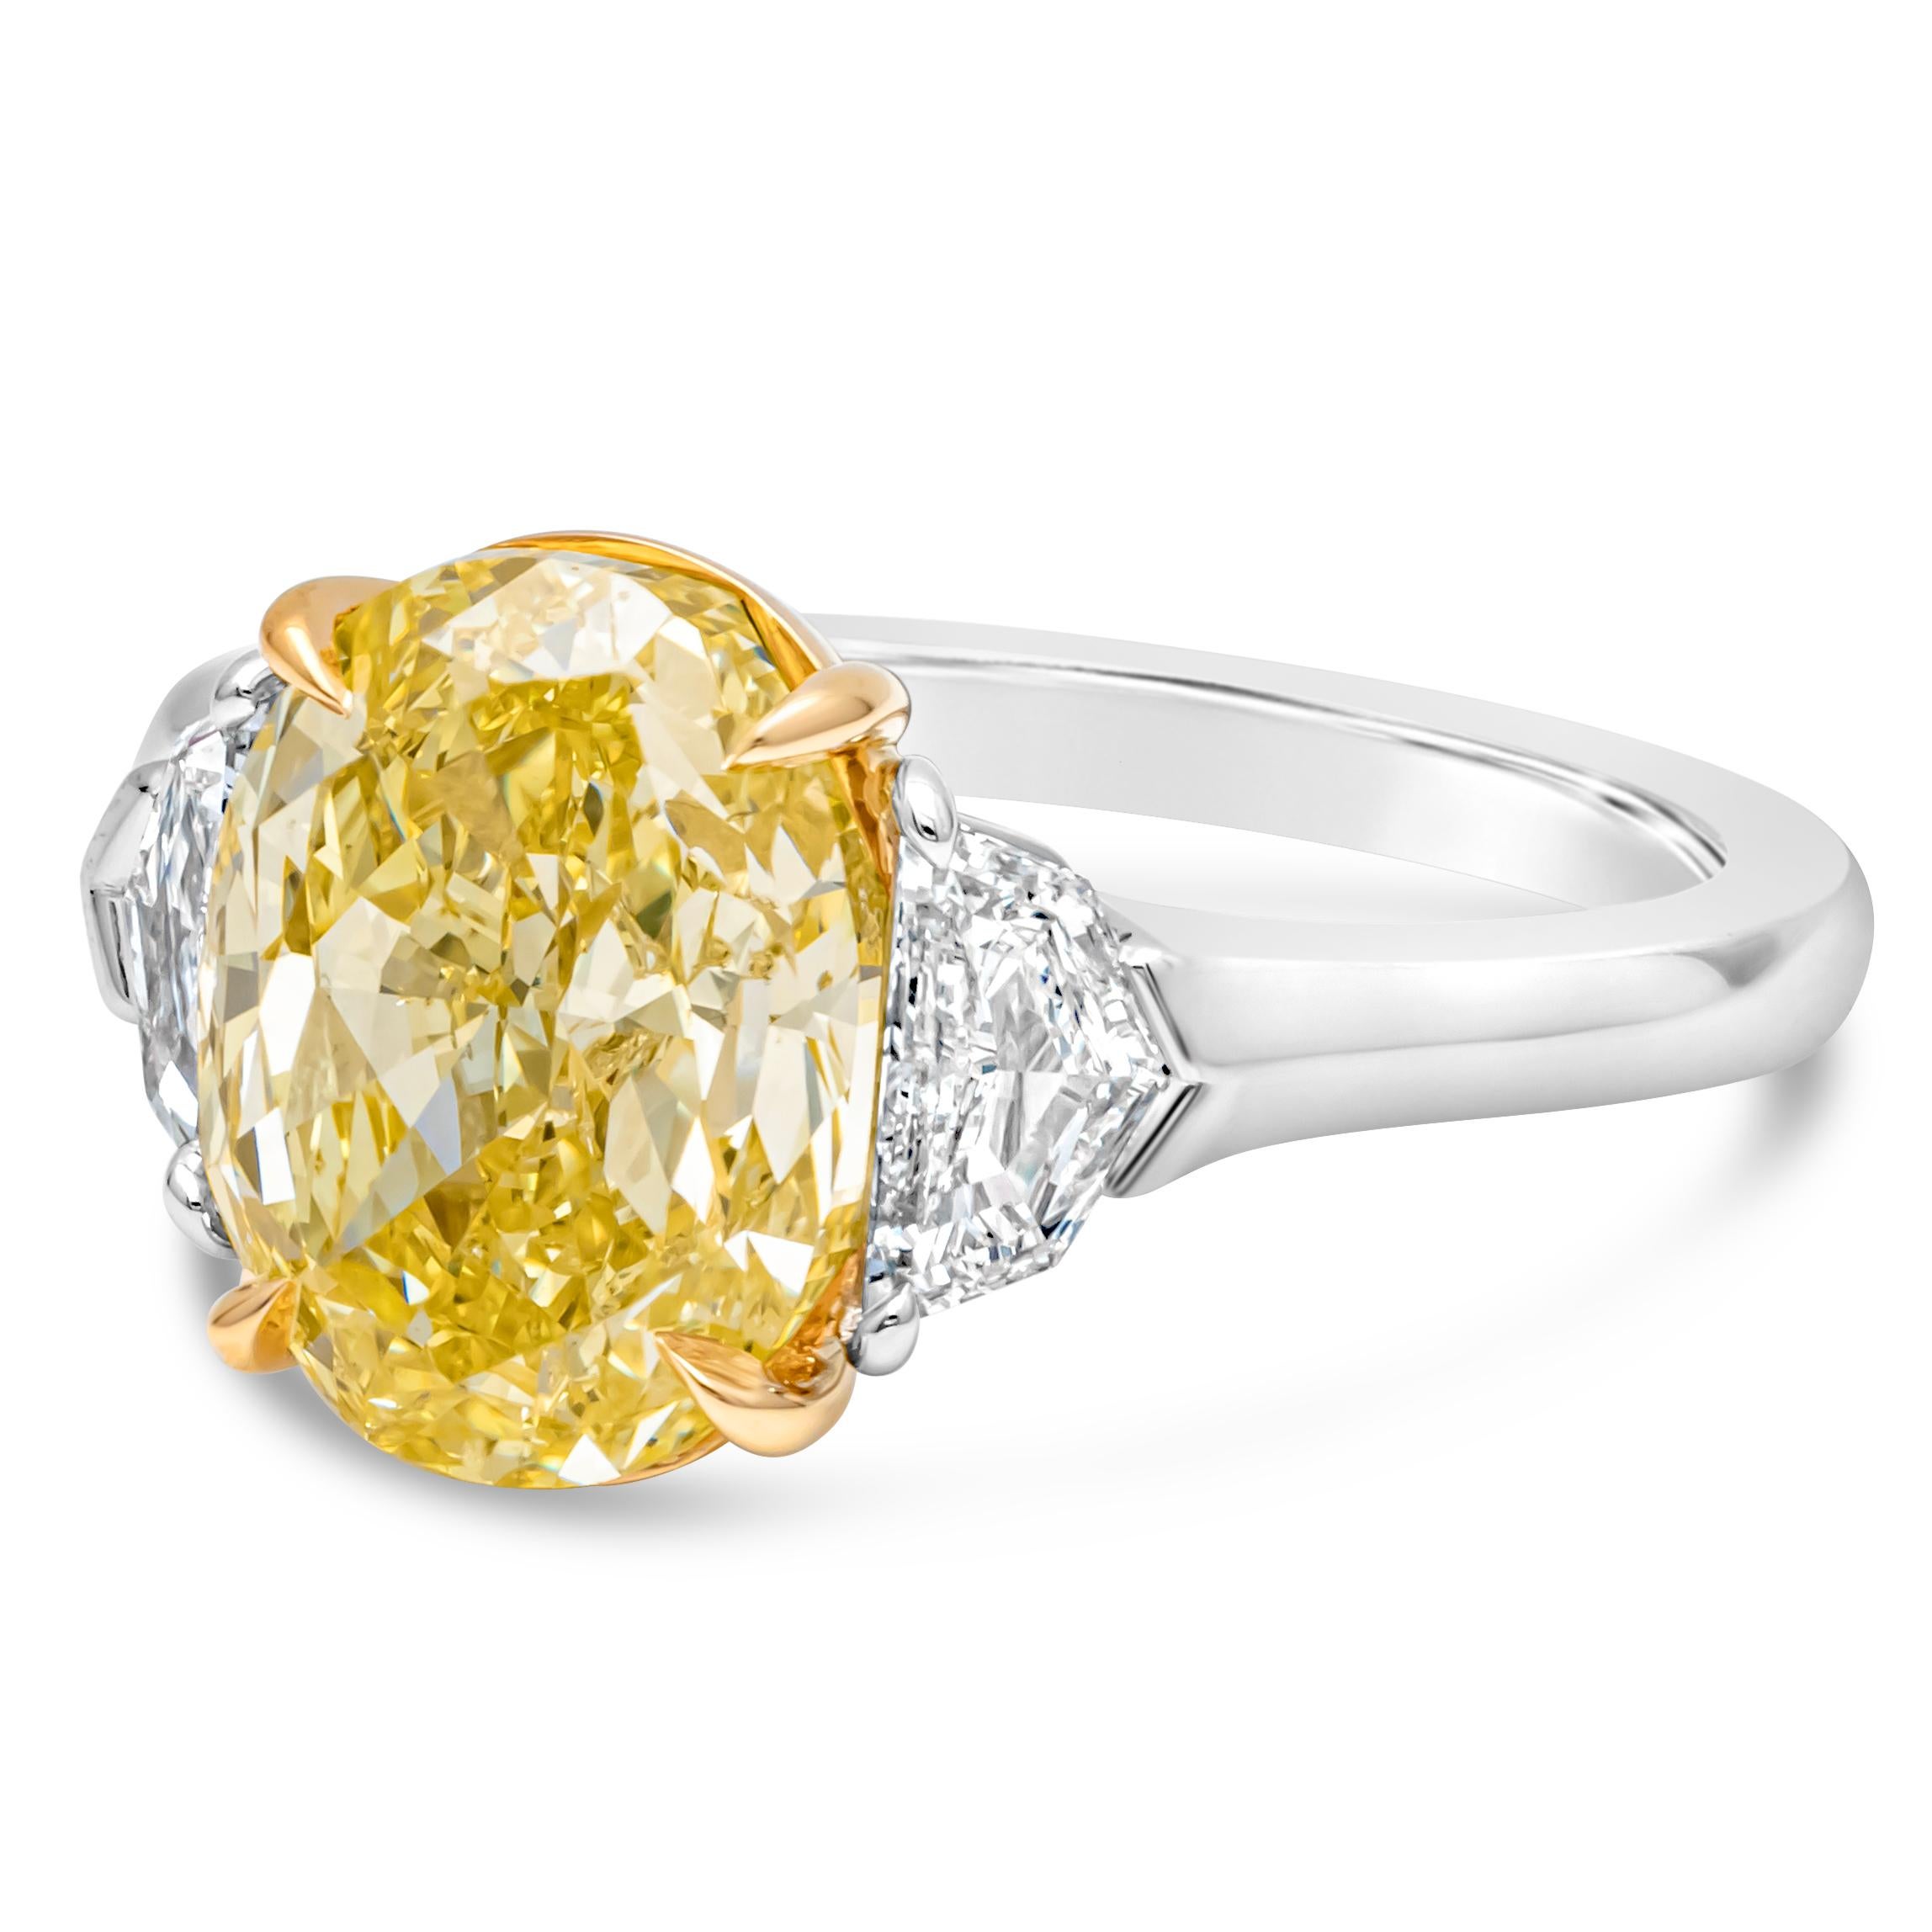 Contemporary GIA Certified 4.12 Carats Oval Cut Fancy Intense Yellow Diamond Ring For Sale